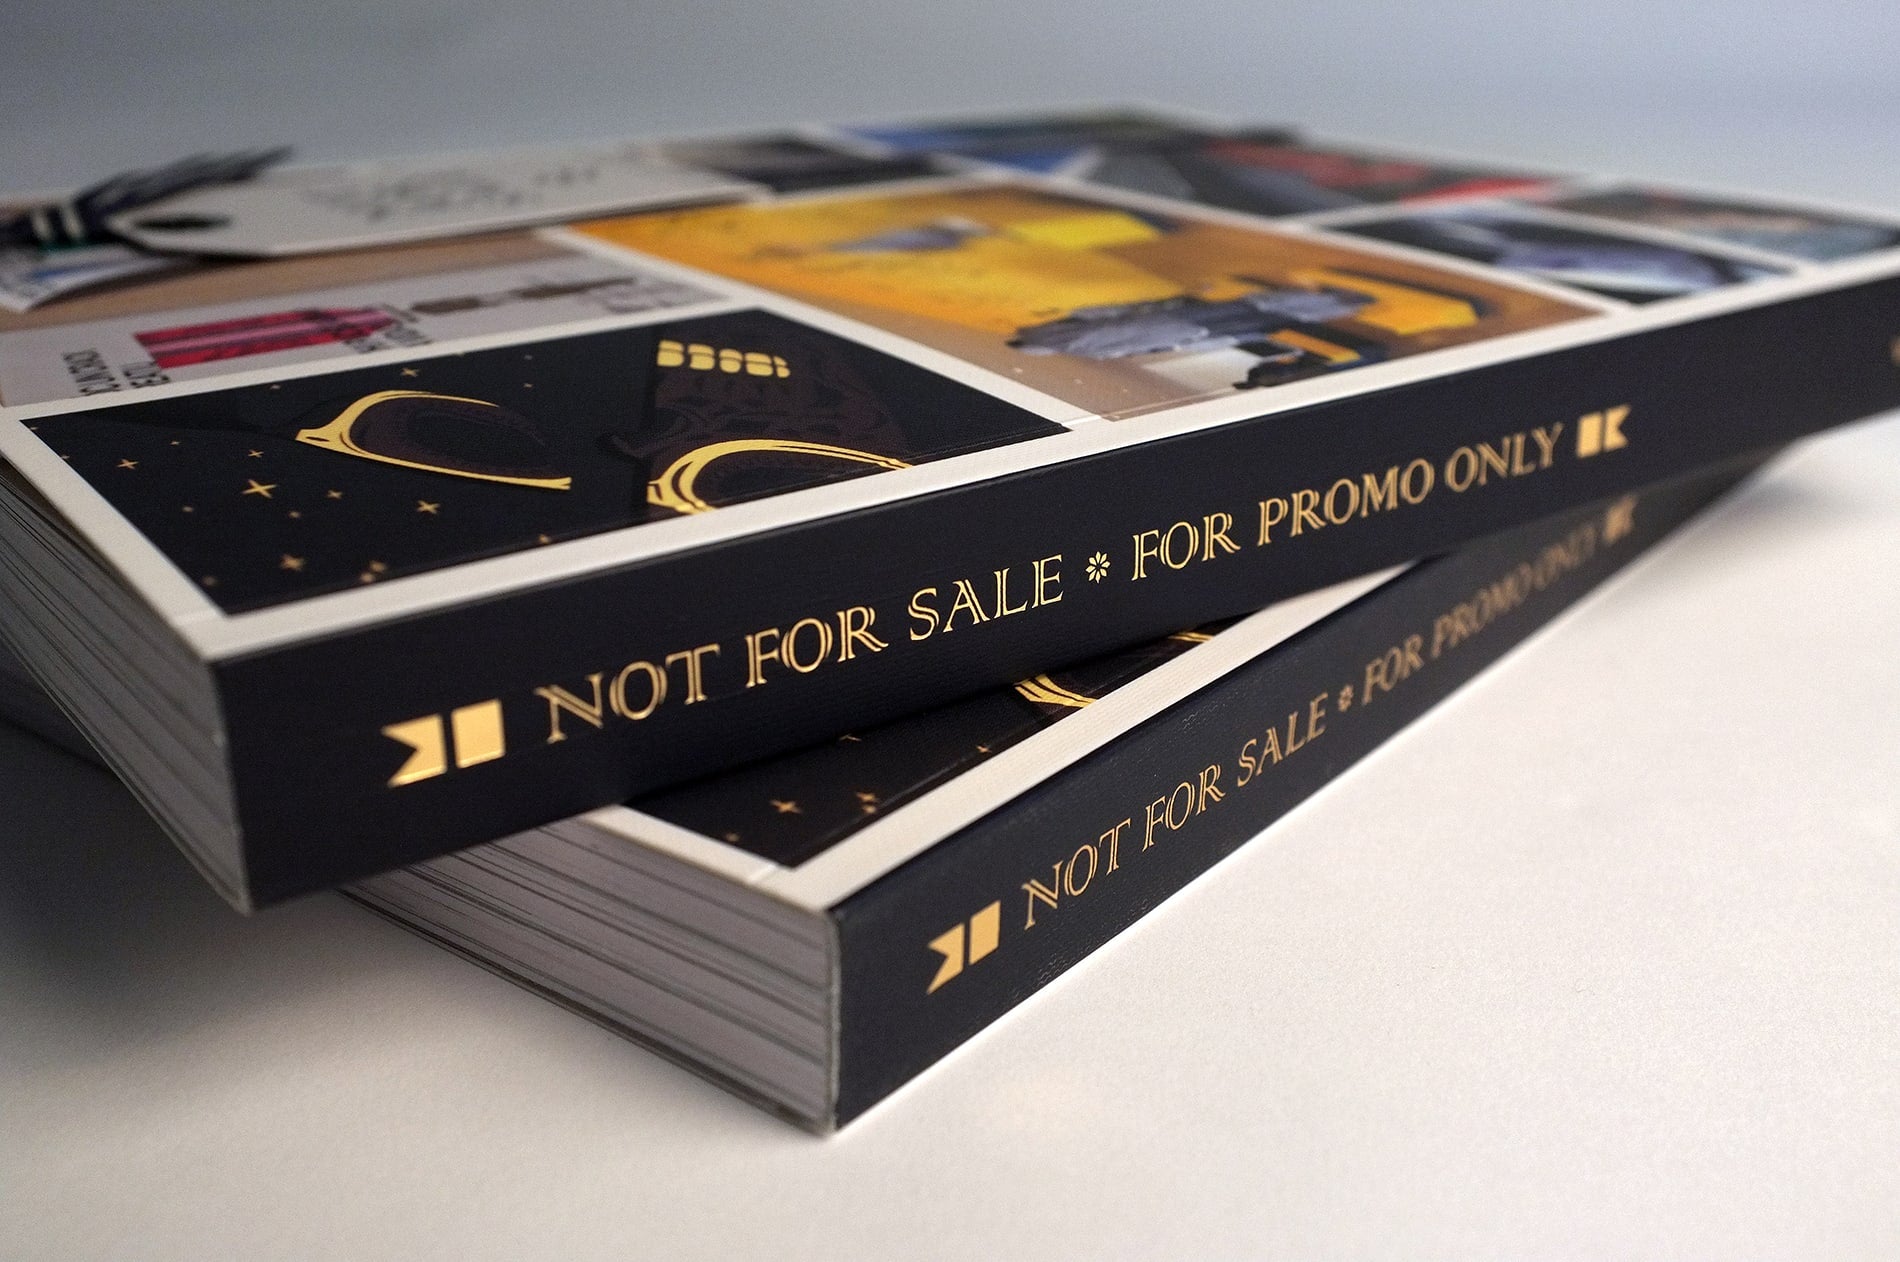 Not For Sale • For Promo Only